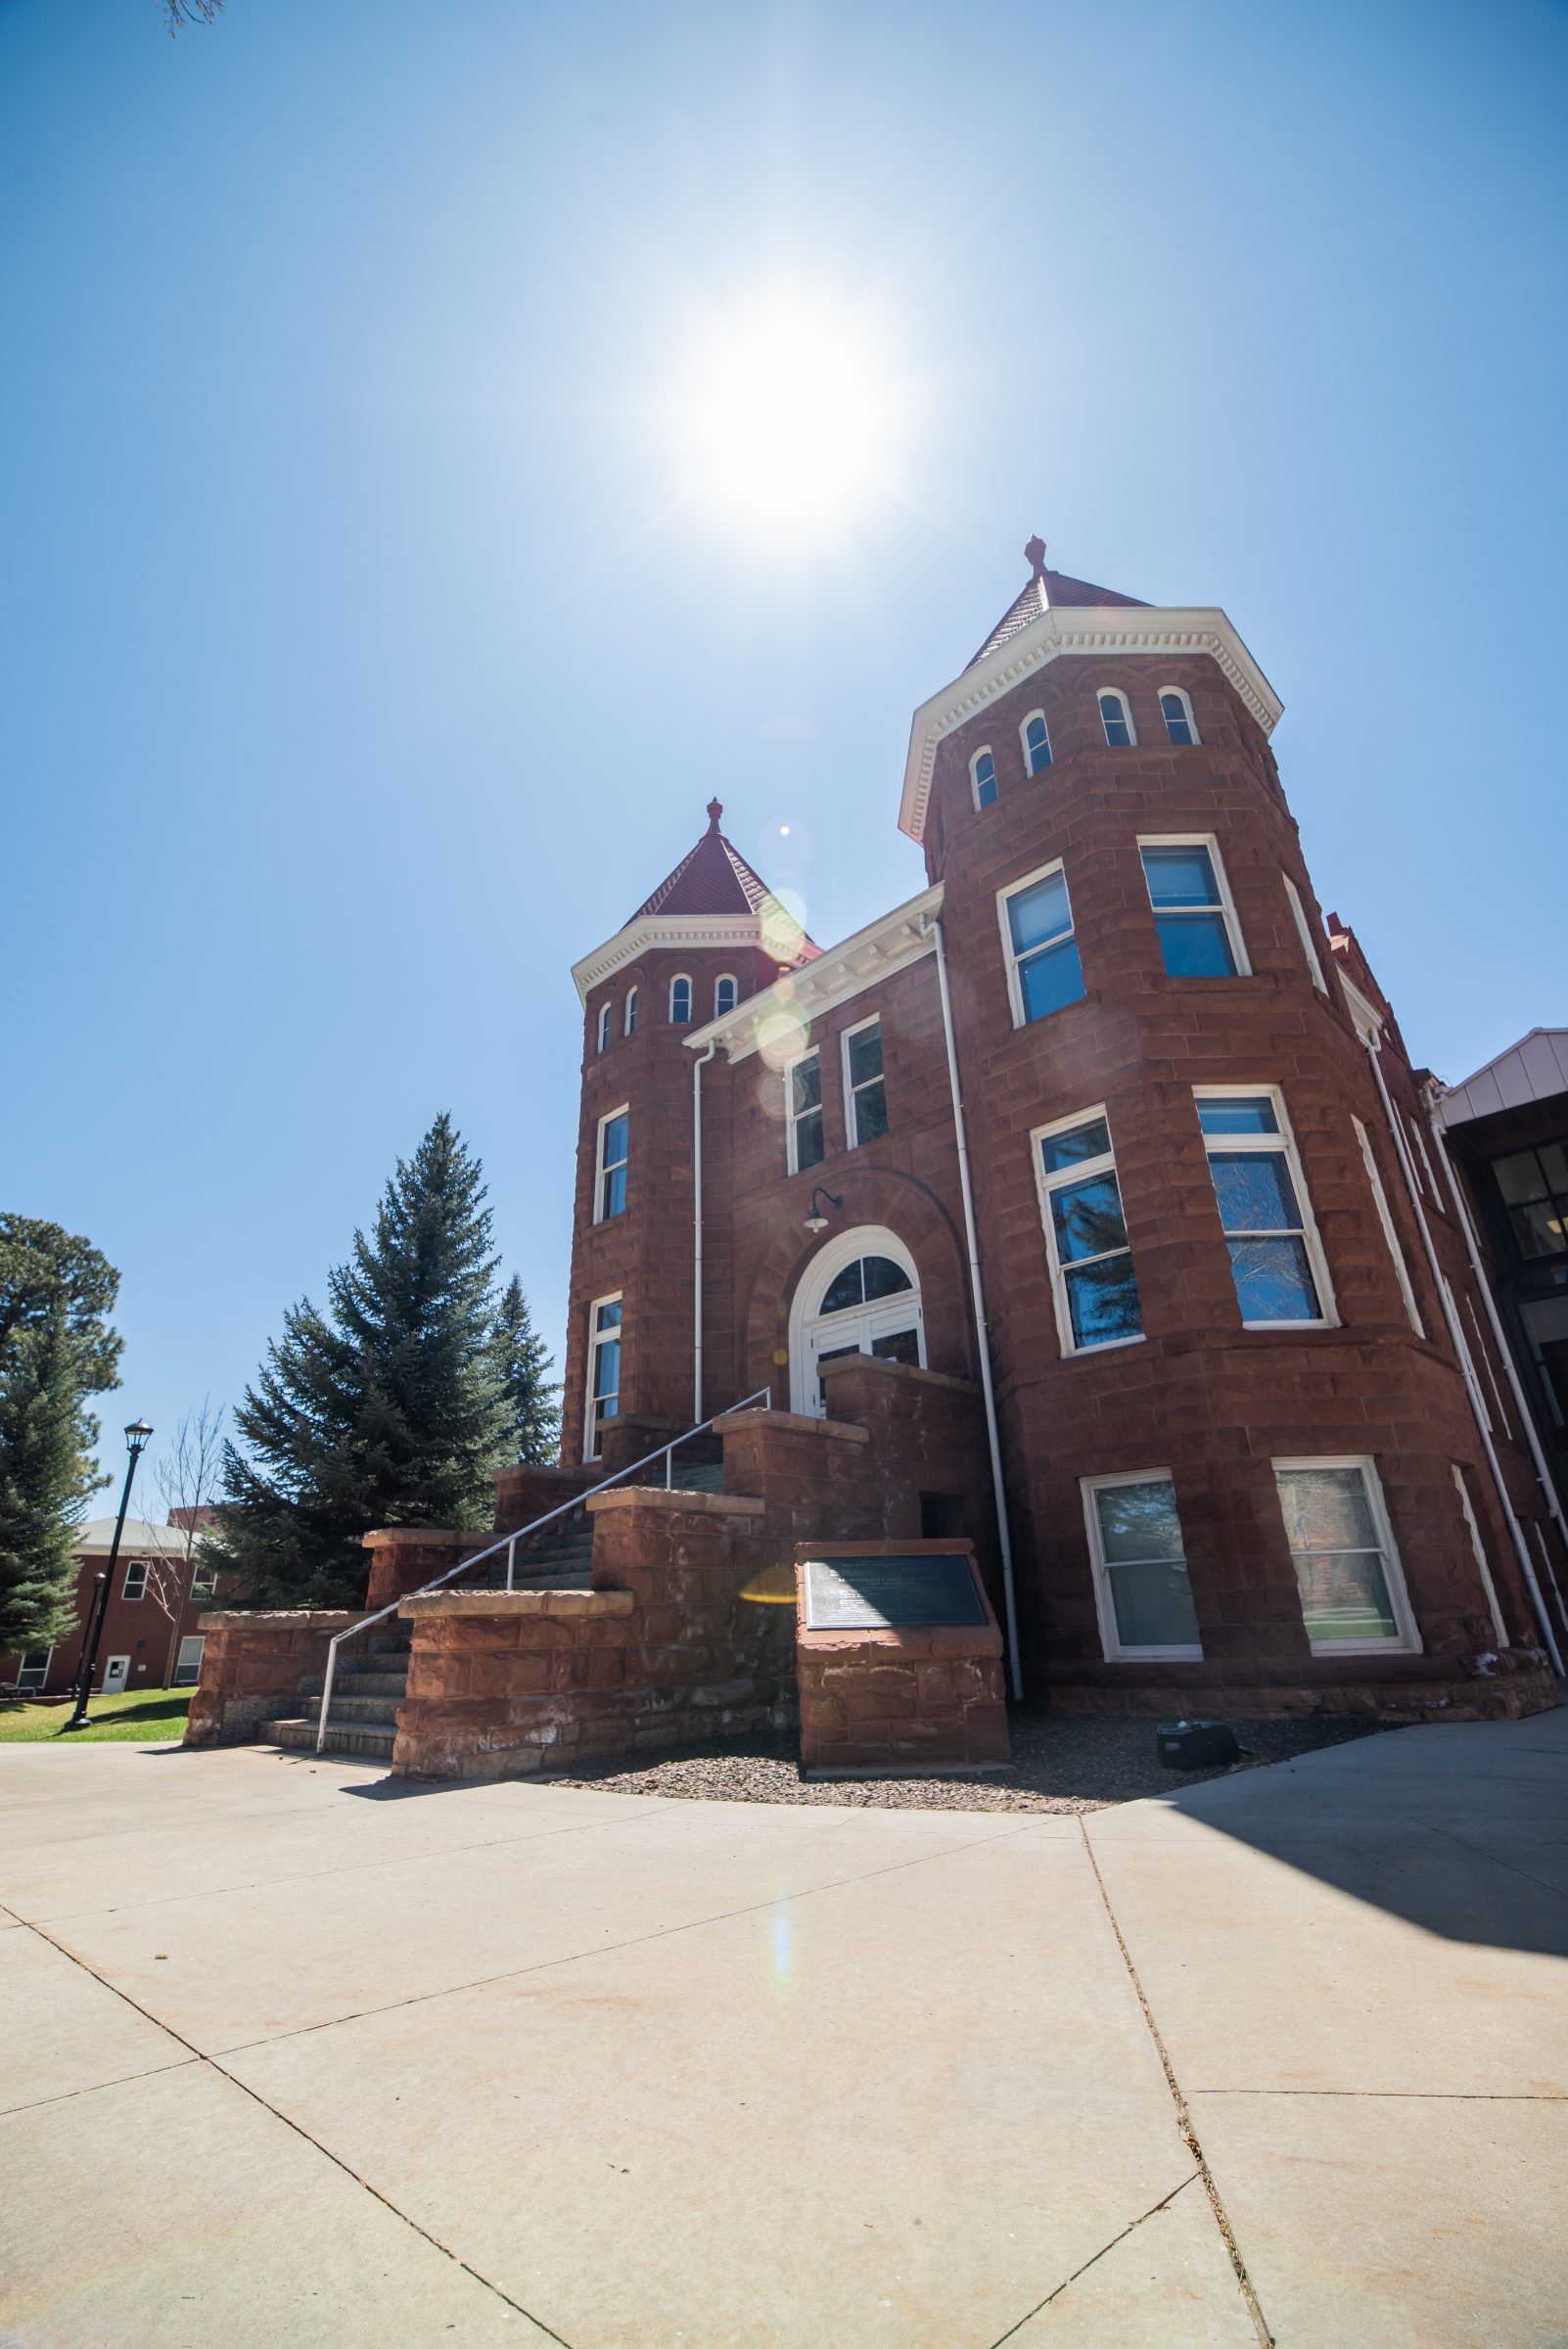 Old Main on the N A U Flagstaff mountain campus.